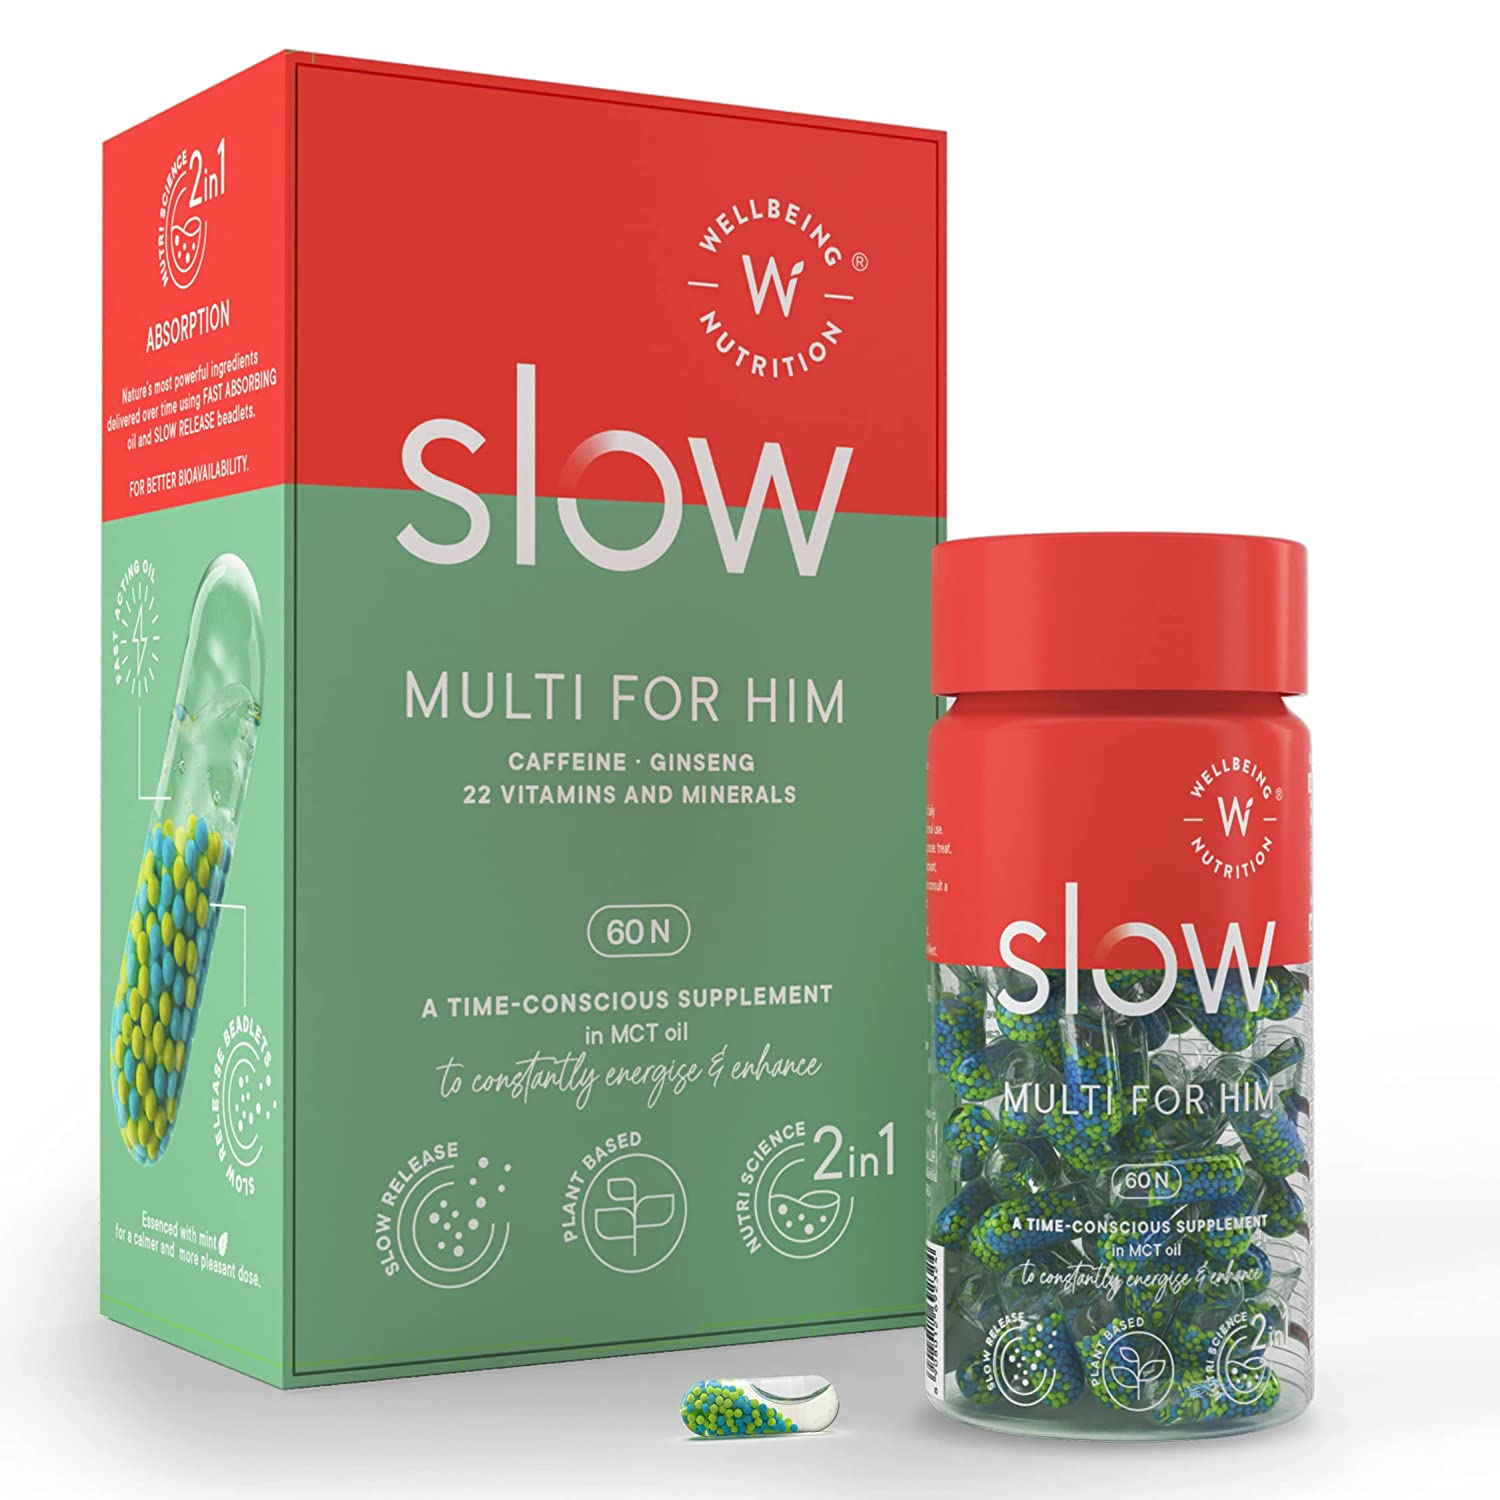 Wellbeing Nutrition Slow Multi For Him (Multivitamin for Men) 60 Capsules